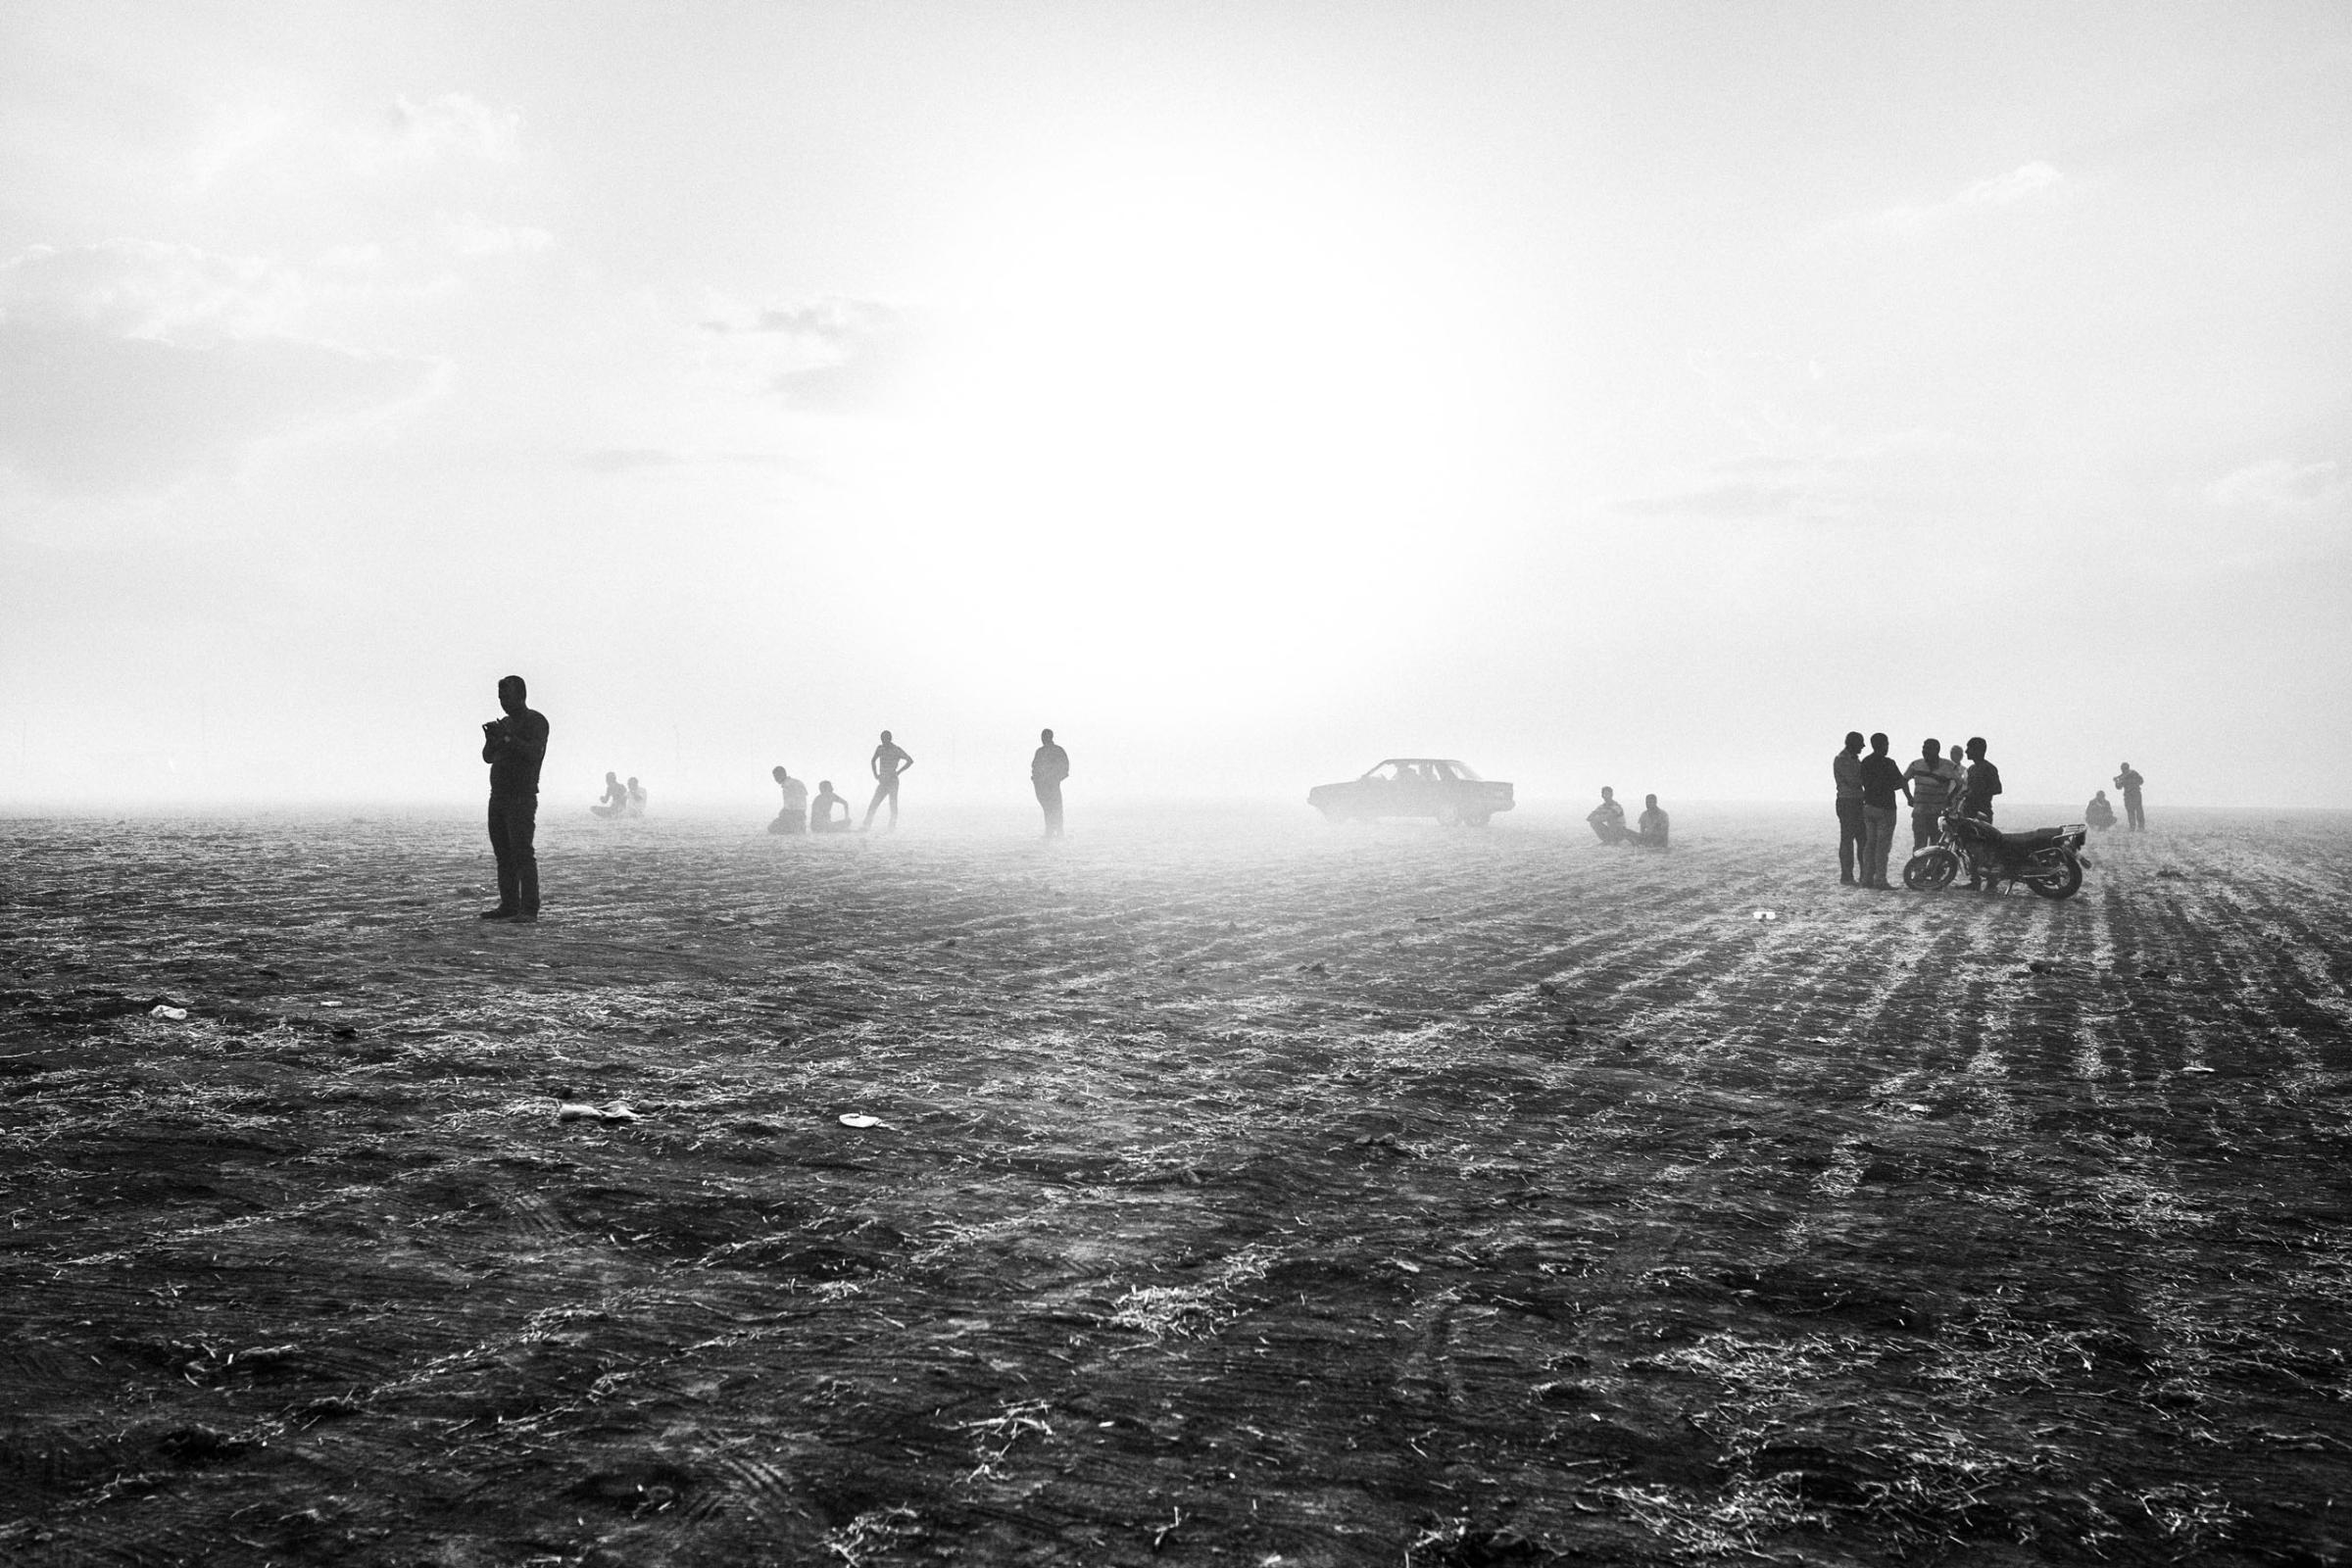 Kurdish Syrian refugees from kobani, Syria wait near the Turkish-Syrian border, Sept. 2014, as the Islamic State of Iraq (ISIS) began an attack on the city, eventually overtaking it in Oct. 2014. Children and elderly crossed mine fields separating Kobani from the Turkish border, in an effort to flee the fighting. According to UNHCR, 170,000 inhabitants of Kobani took refuge in the camps in Turkey.